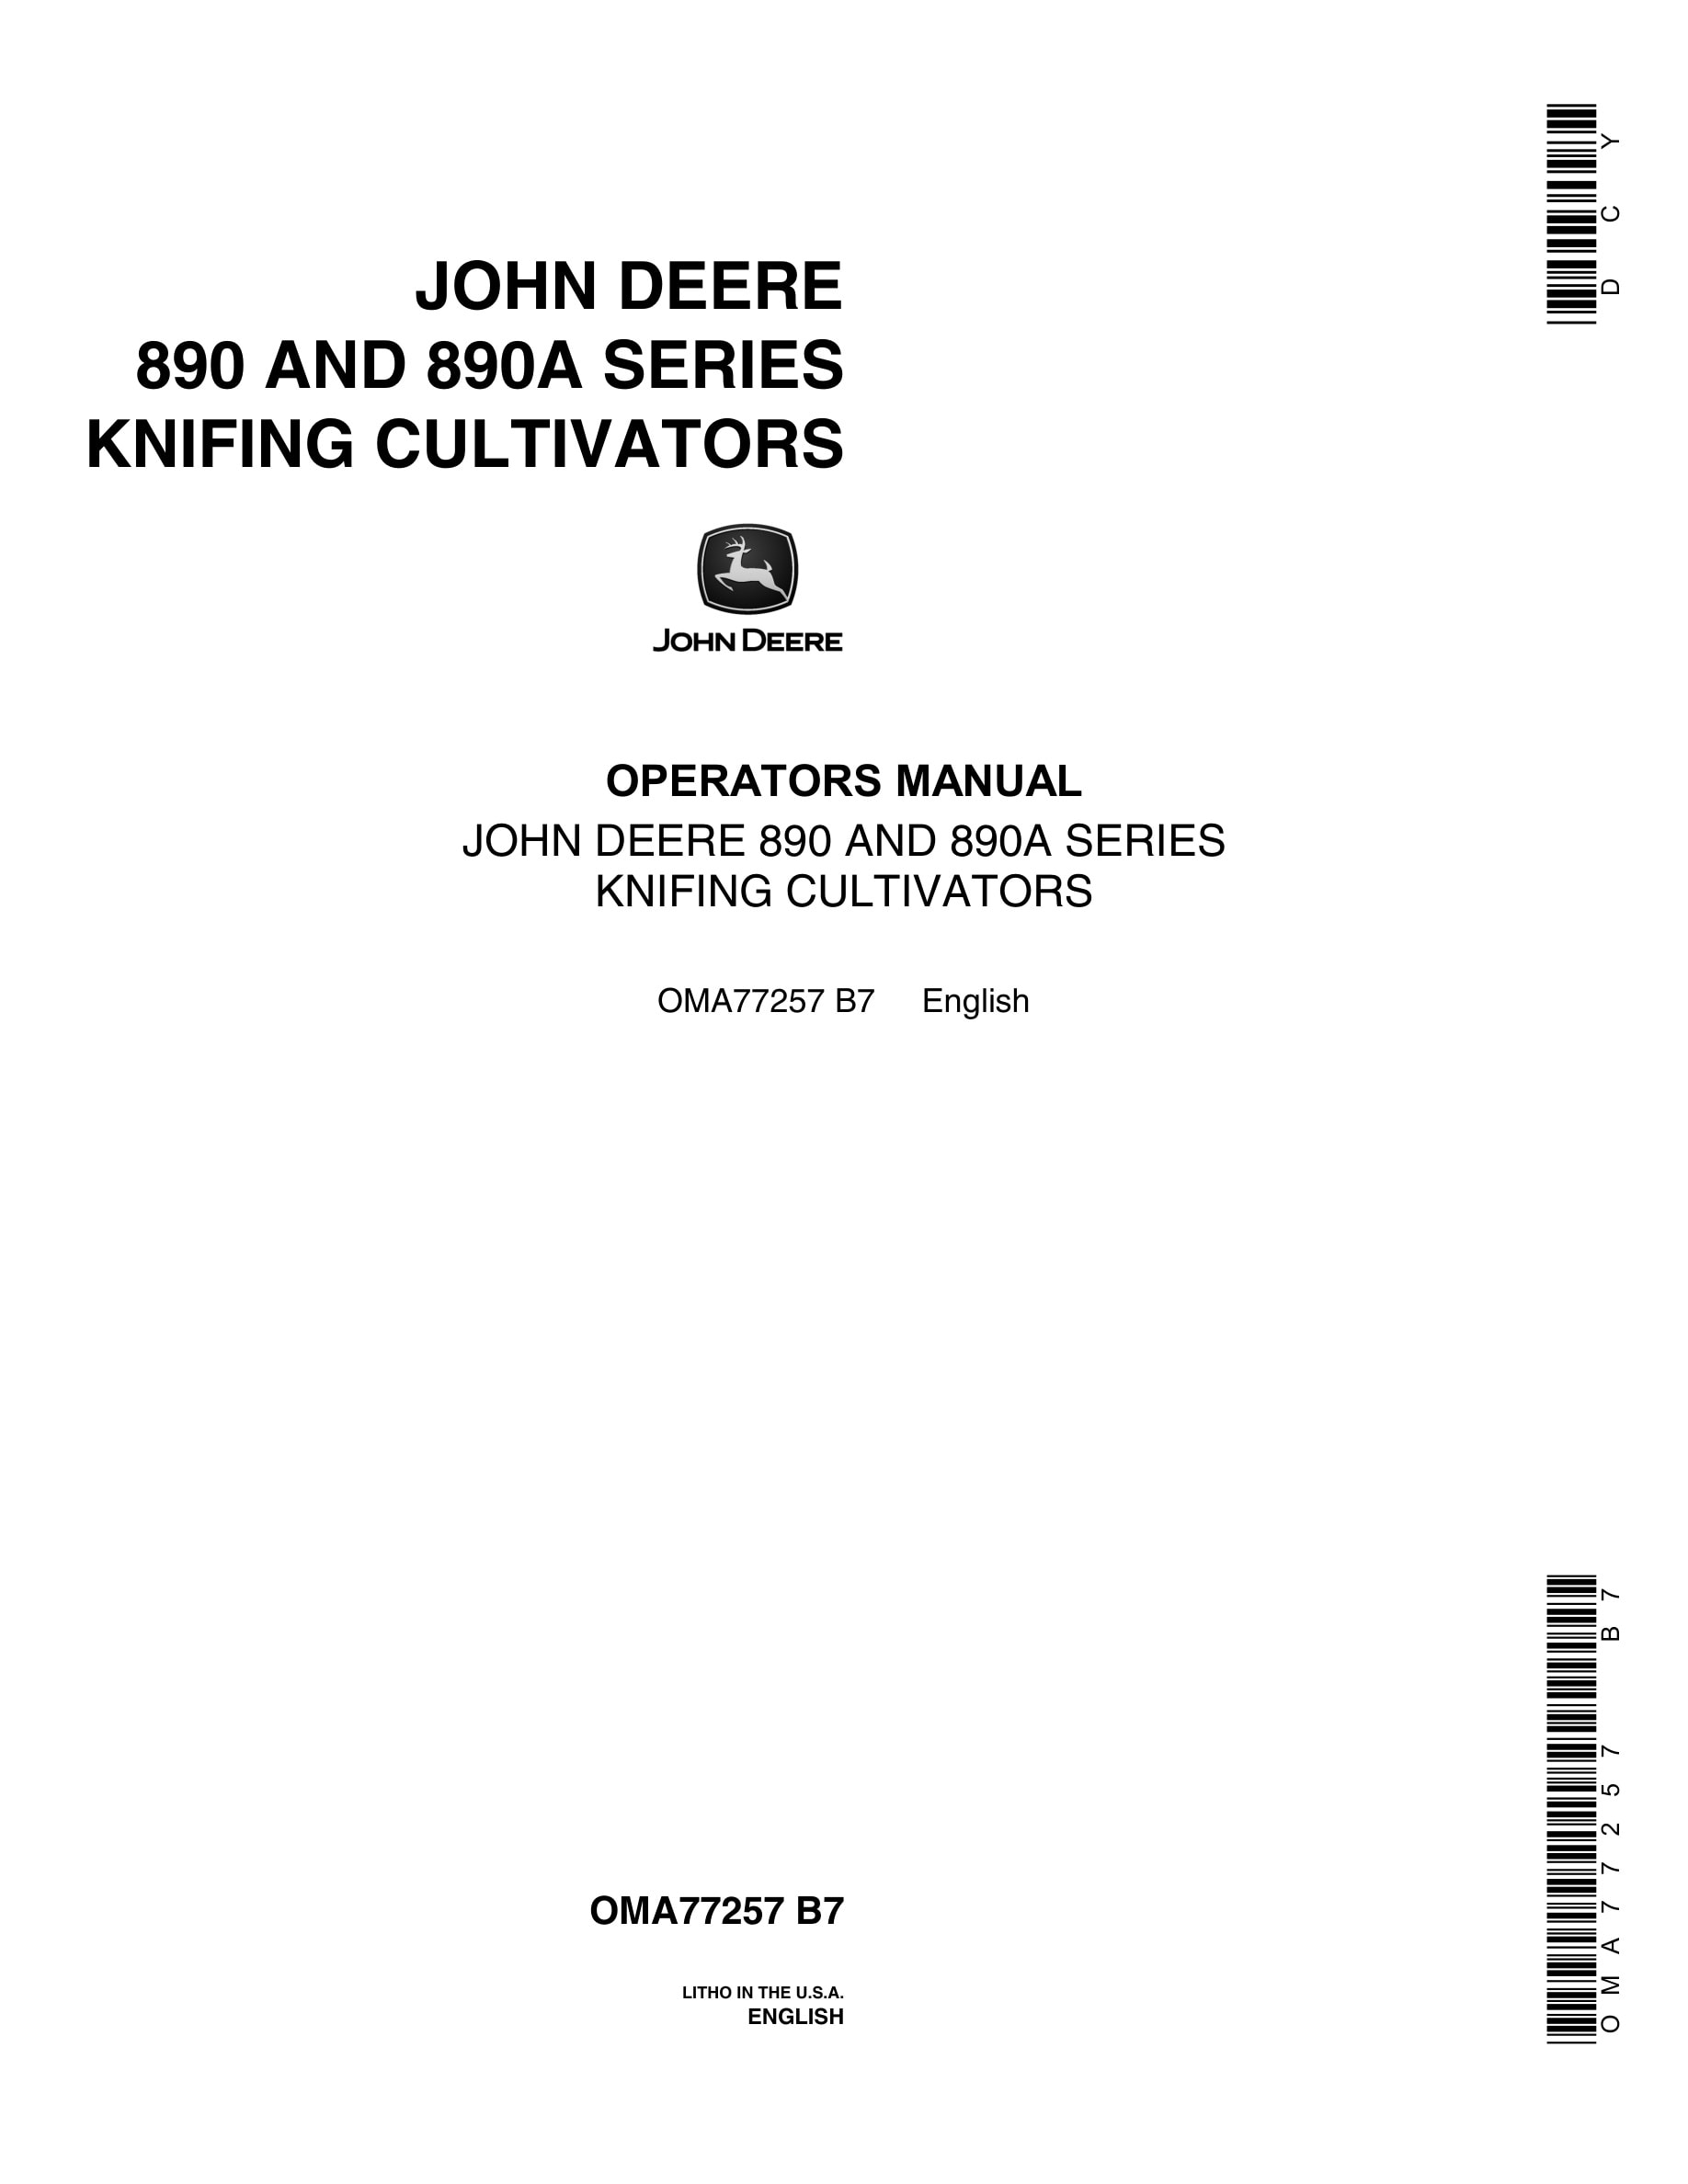 John Deere 890 AND 890A SERIES KNIFING CULTIVATOR Operator Manual OMA77257-1